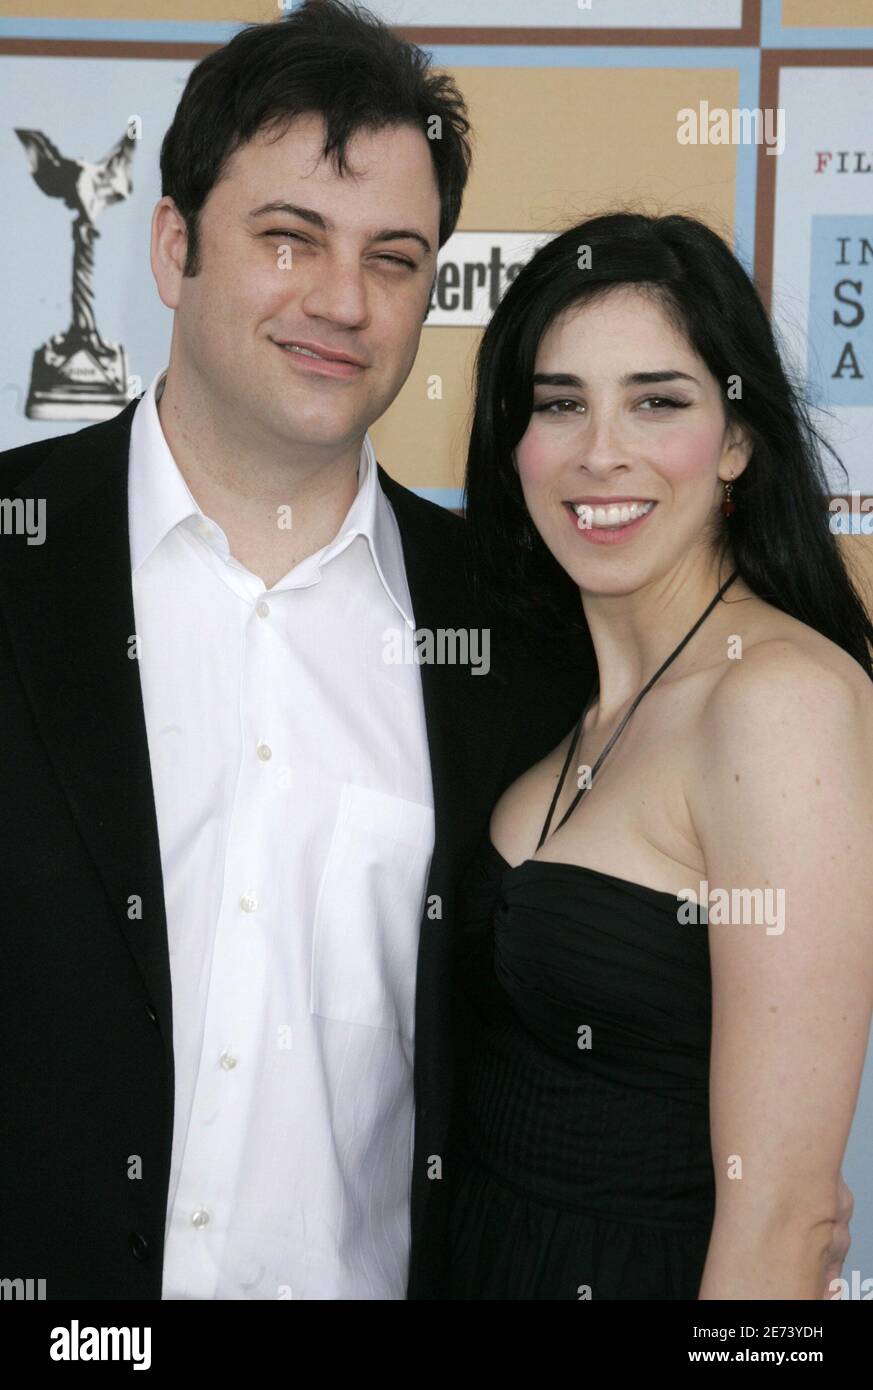 Comedian Sarah Silverman and her boyfriend comedian Jimmy Kimmel arrive at the Independent Spirit Awards in Santa Monica, California, March 4, 2006. Silverman is a Master of Ceremonies for the show. Stock Photo